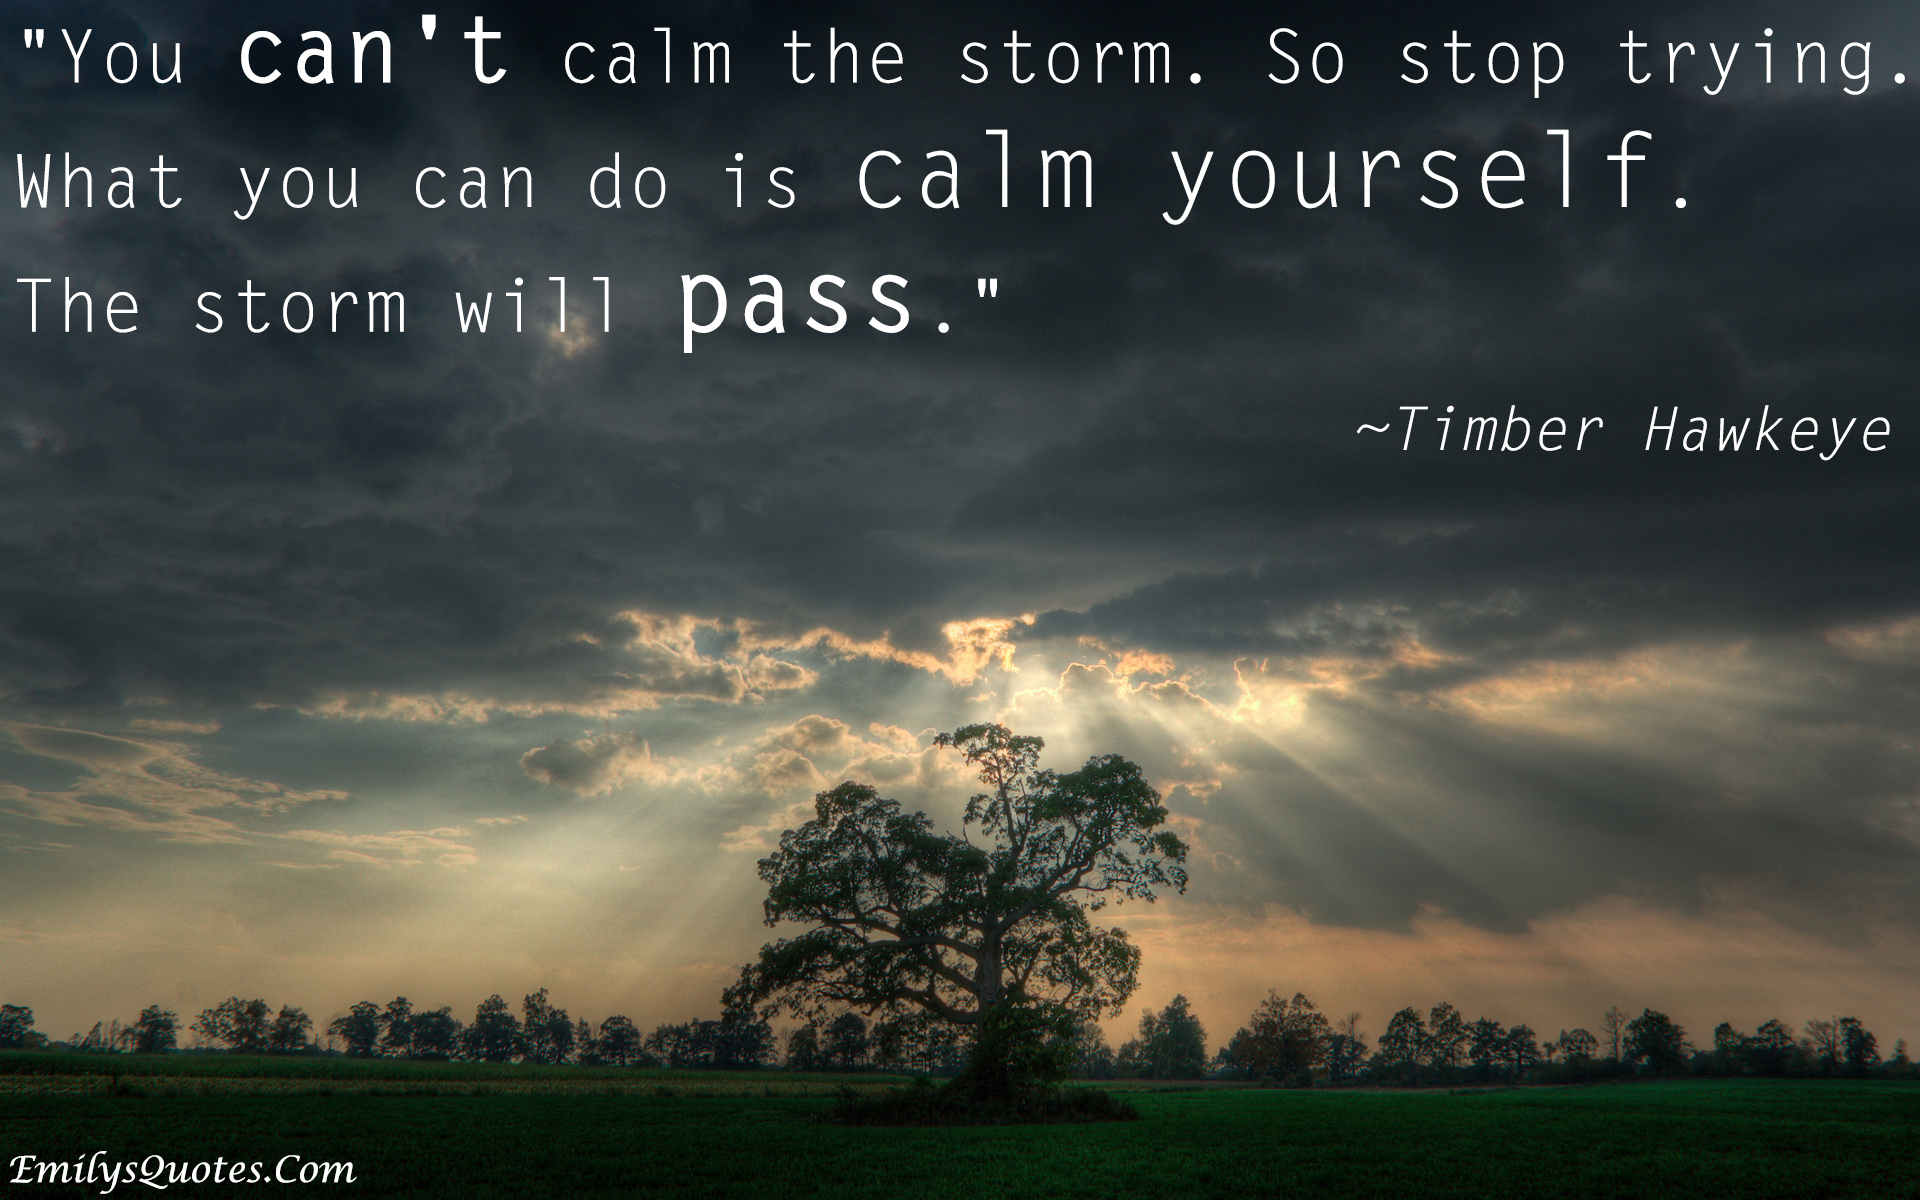 You can’t calm the storm. so stop trying. What you can do is calm yourself. The storm will pass